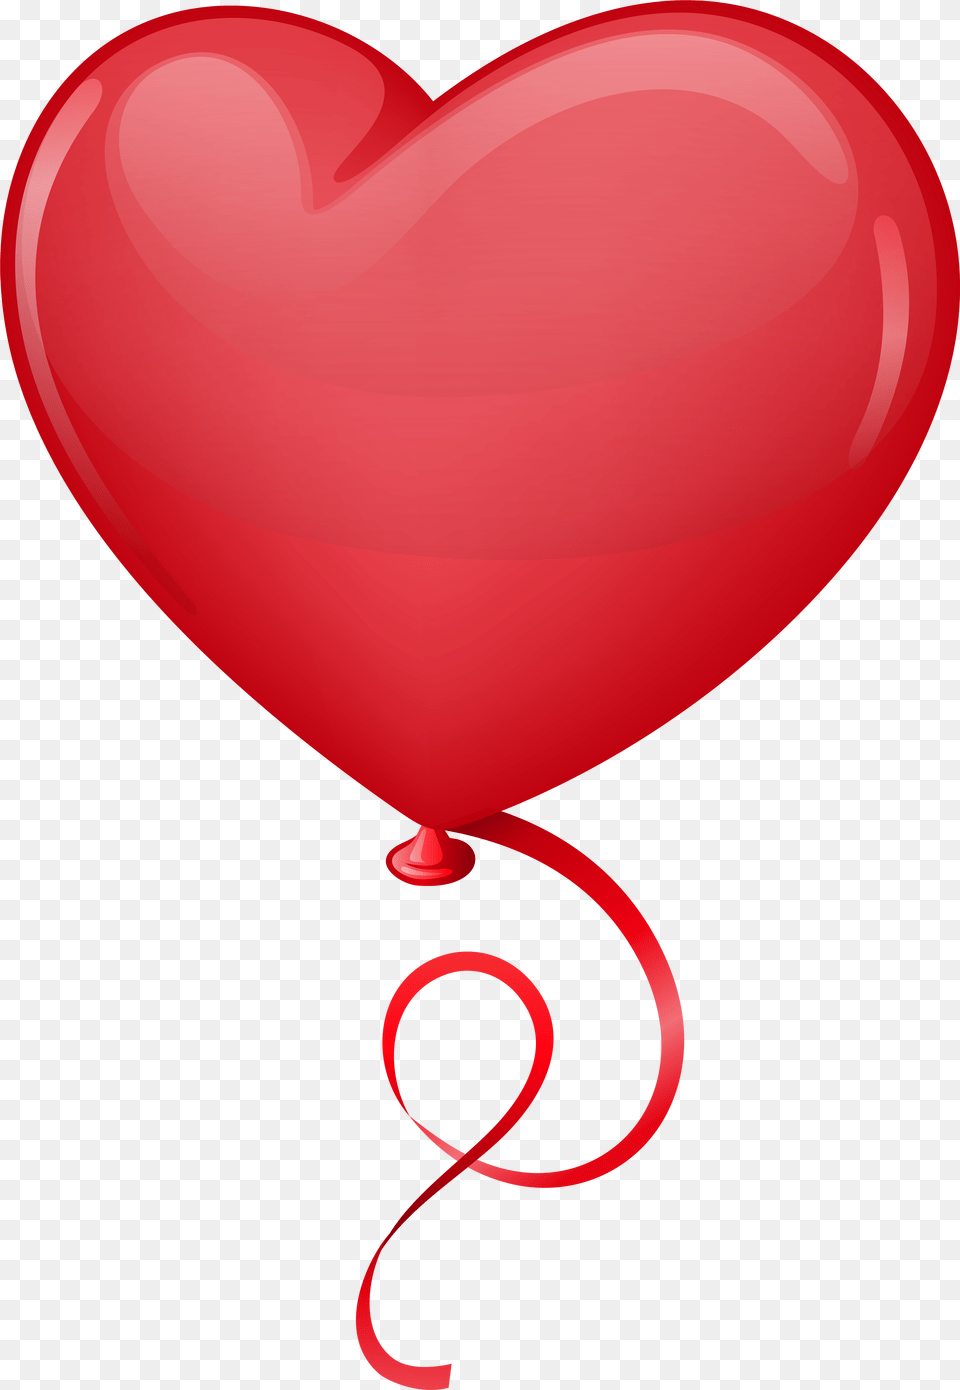 Of Red Heart Red Heart Balloon Cartoon Png Image